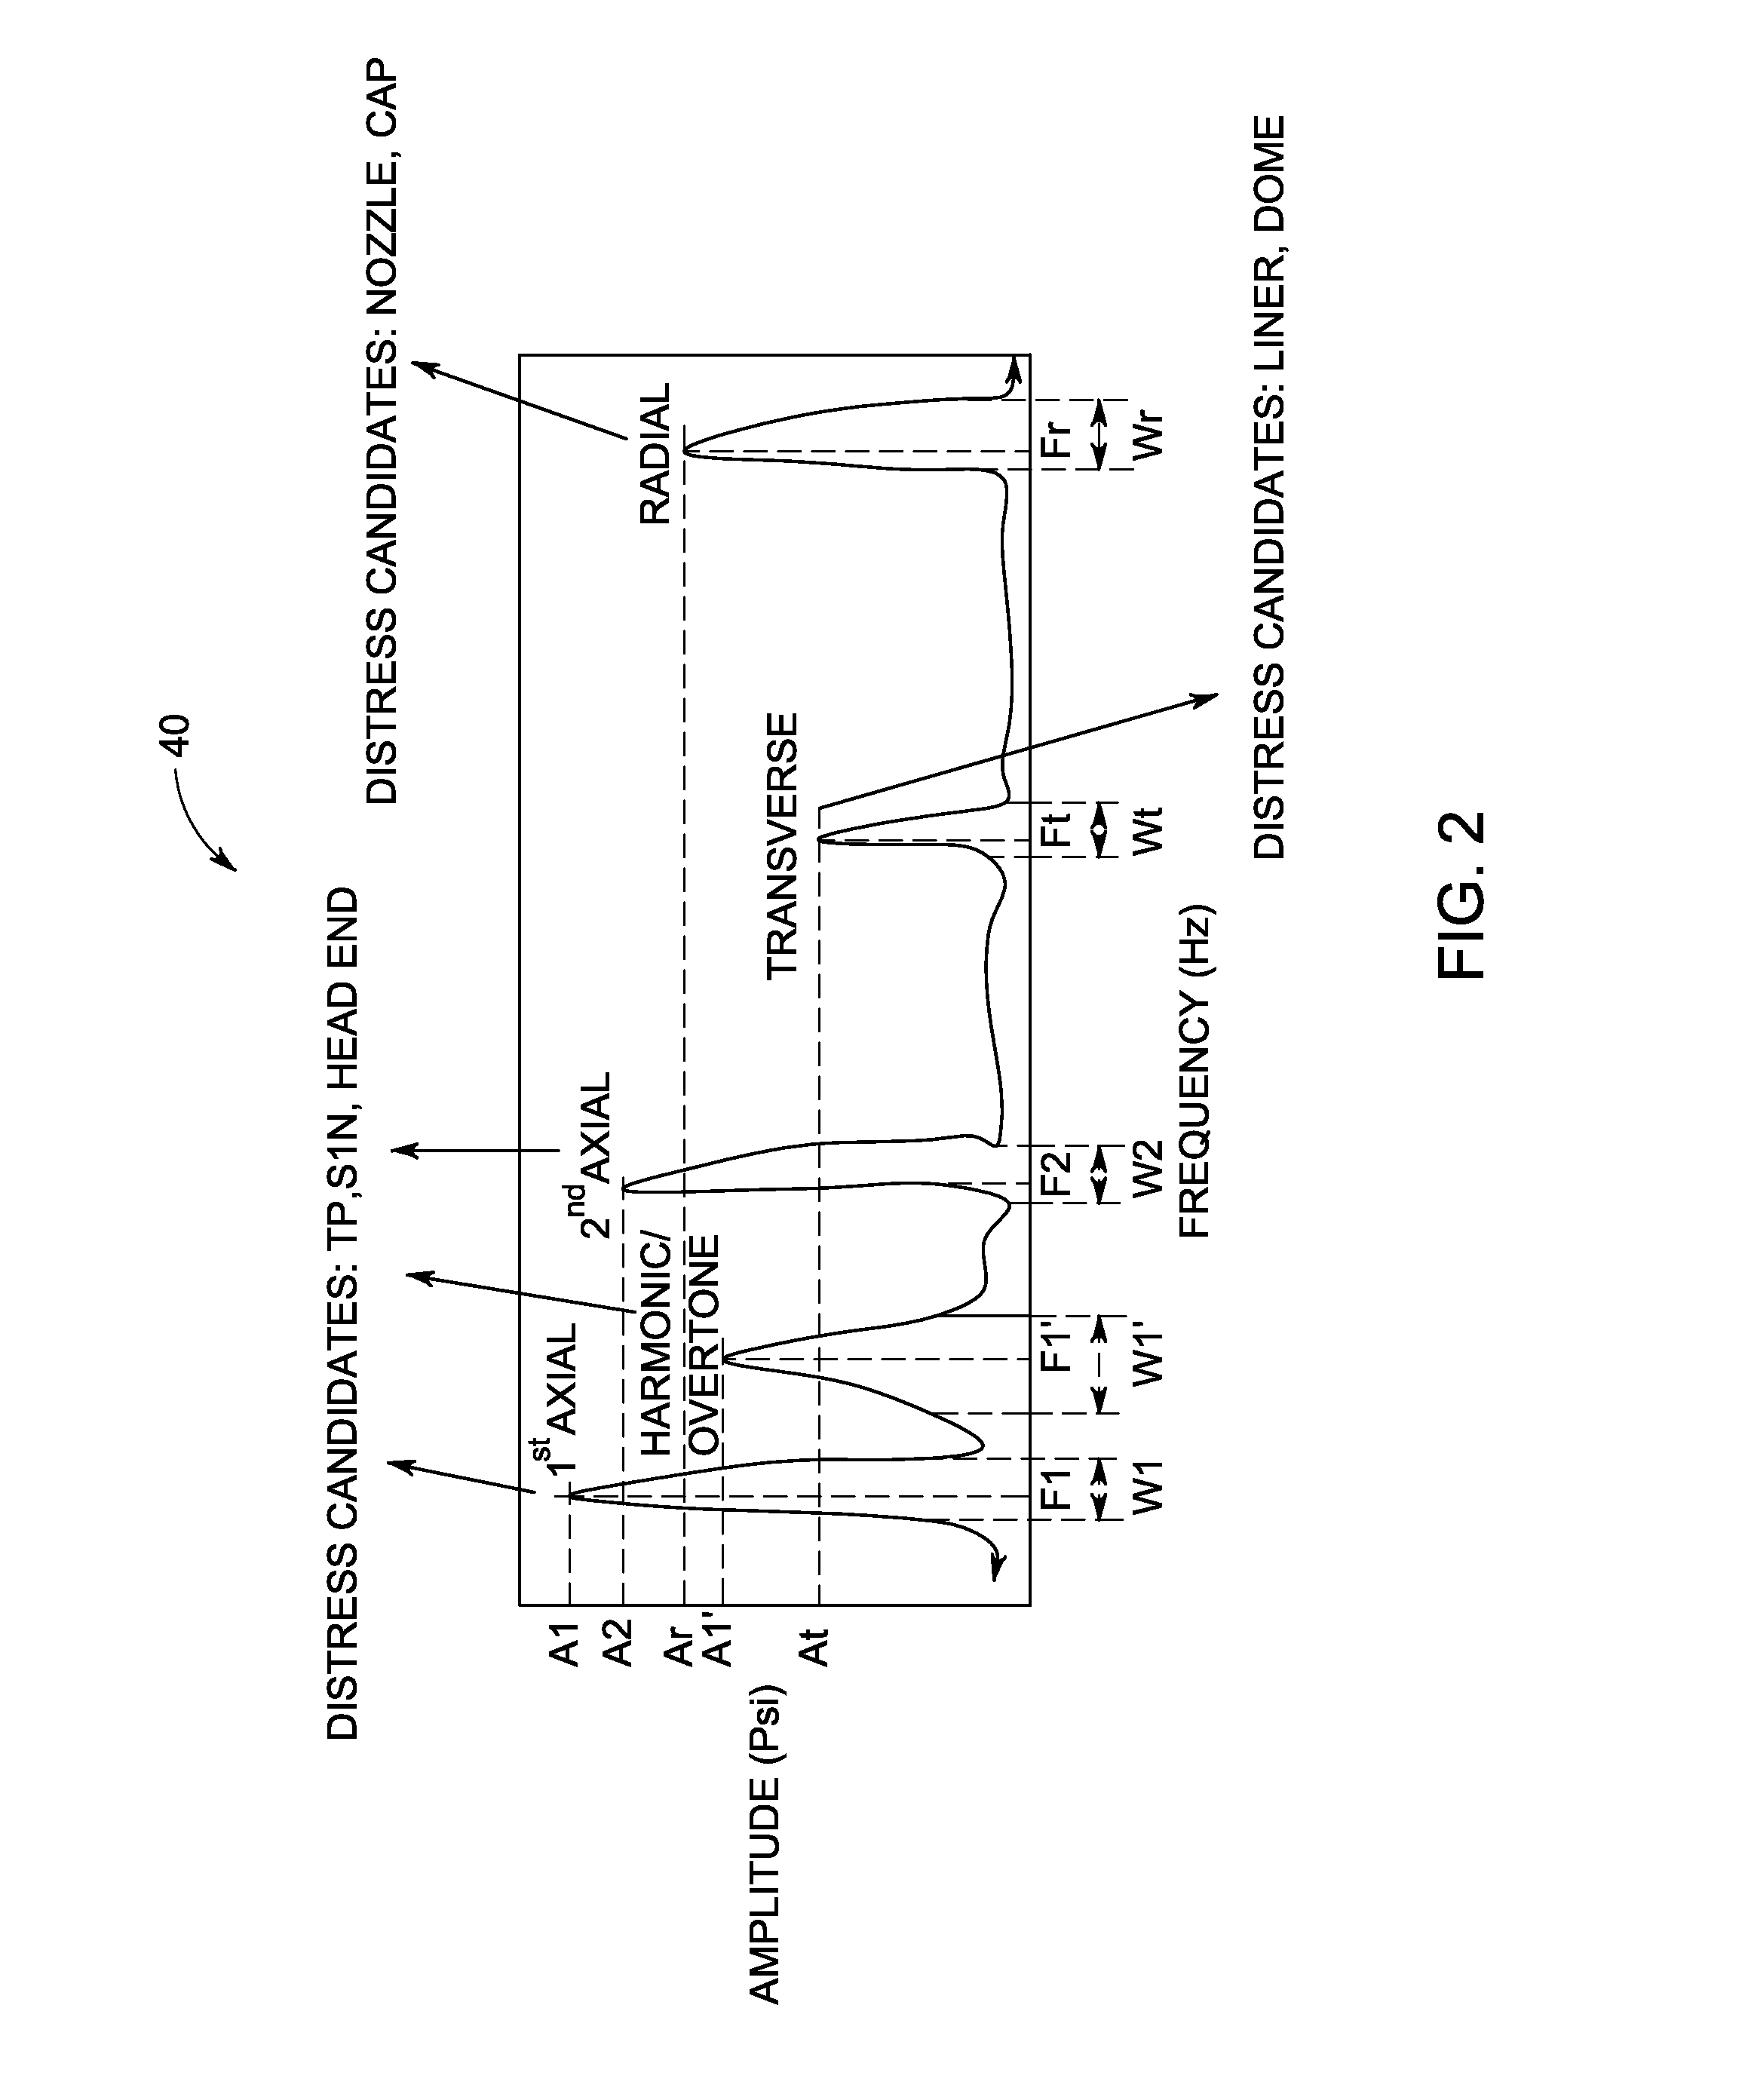 Combustor health and performance monitoring system for gas turbines using combustion dynamics